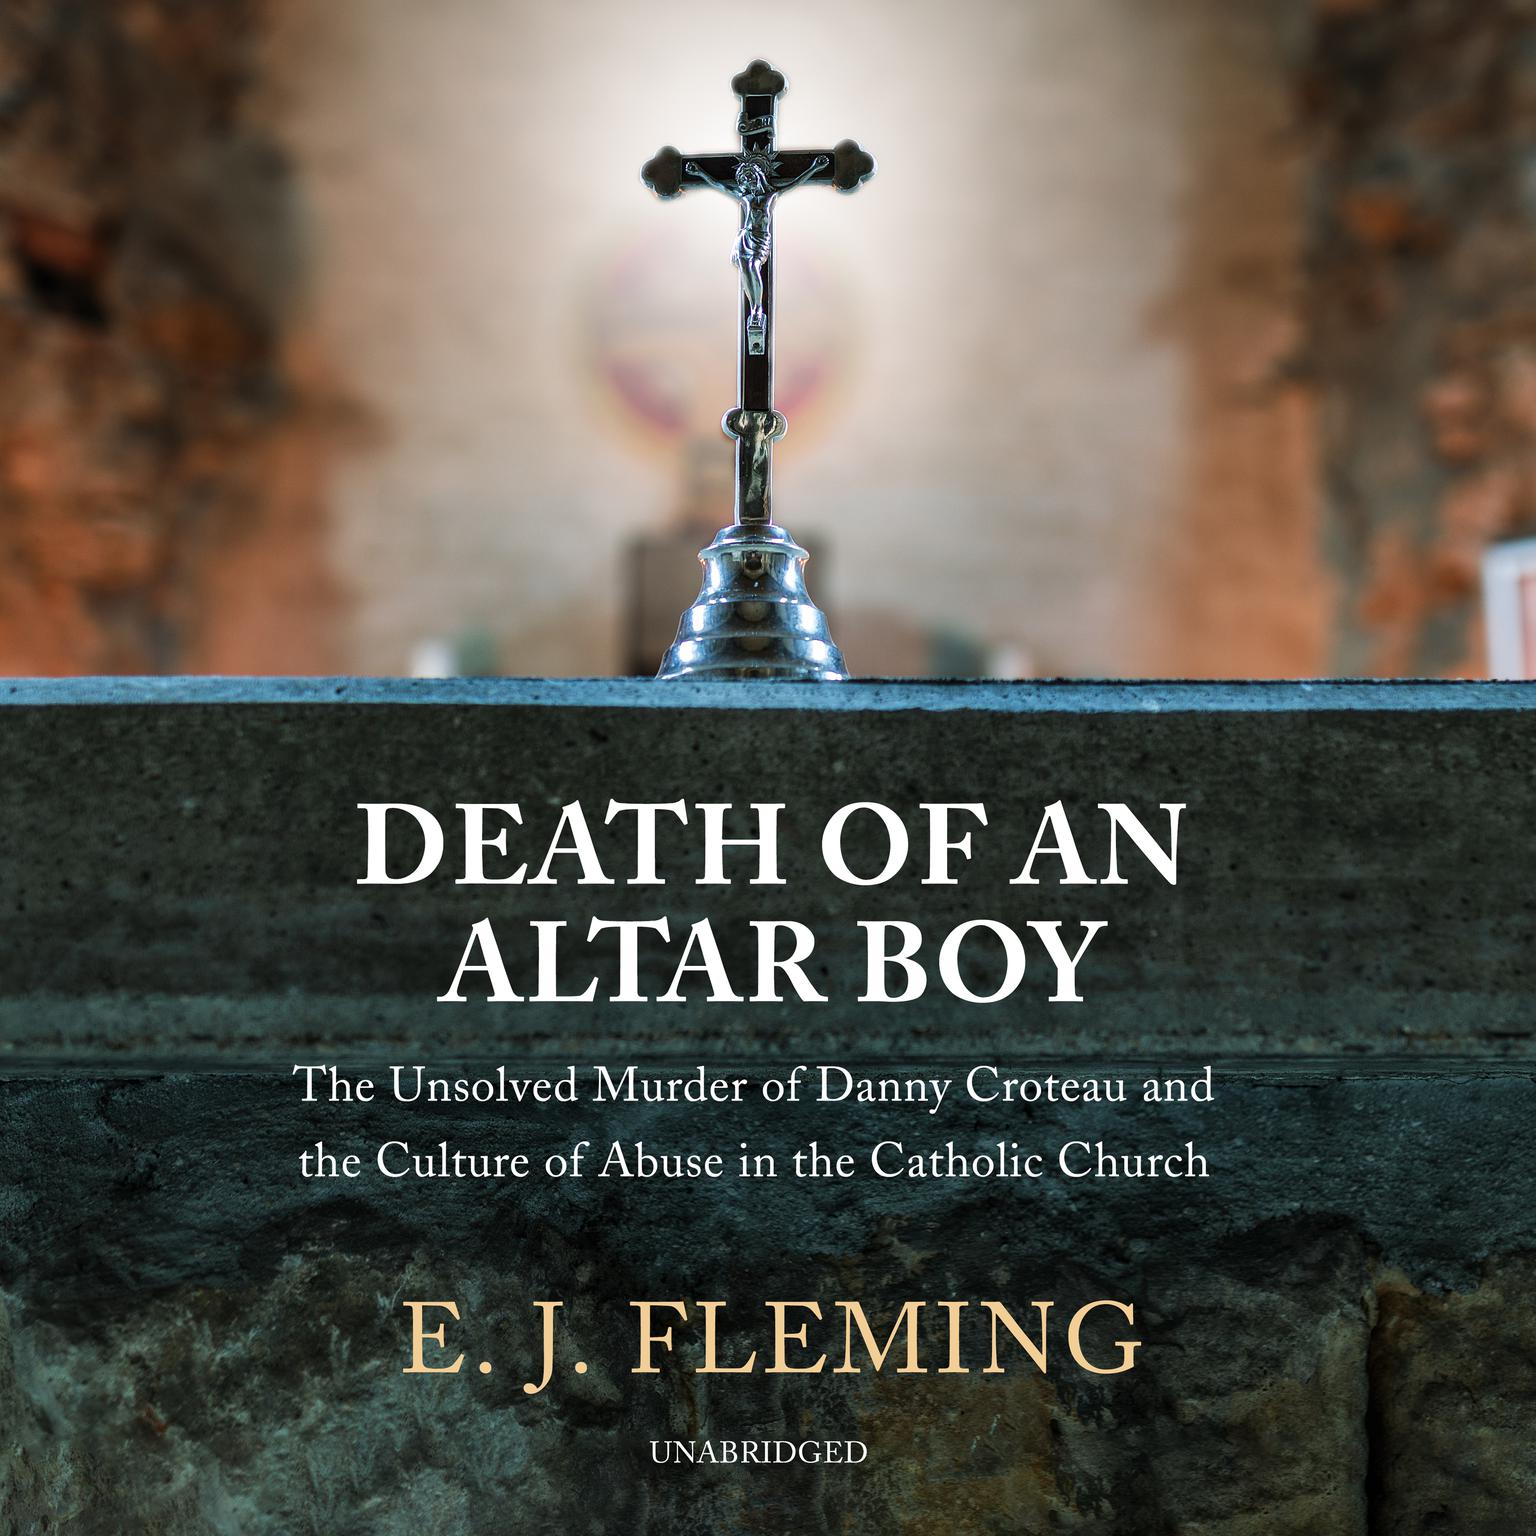 Death of an Altar Boy: The Unsolved Murder of Danny Croteau and the Culture of Abuse in the Catholic Church  Audiobook, by E. J. Fleming